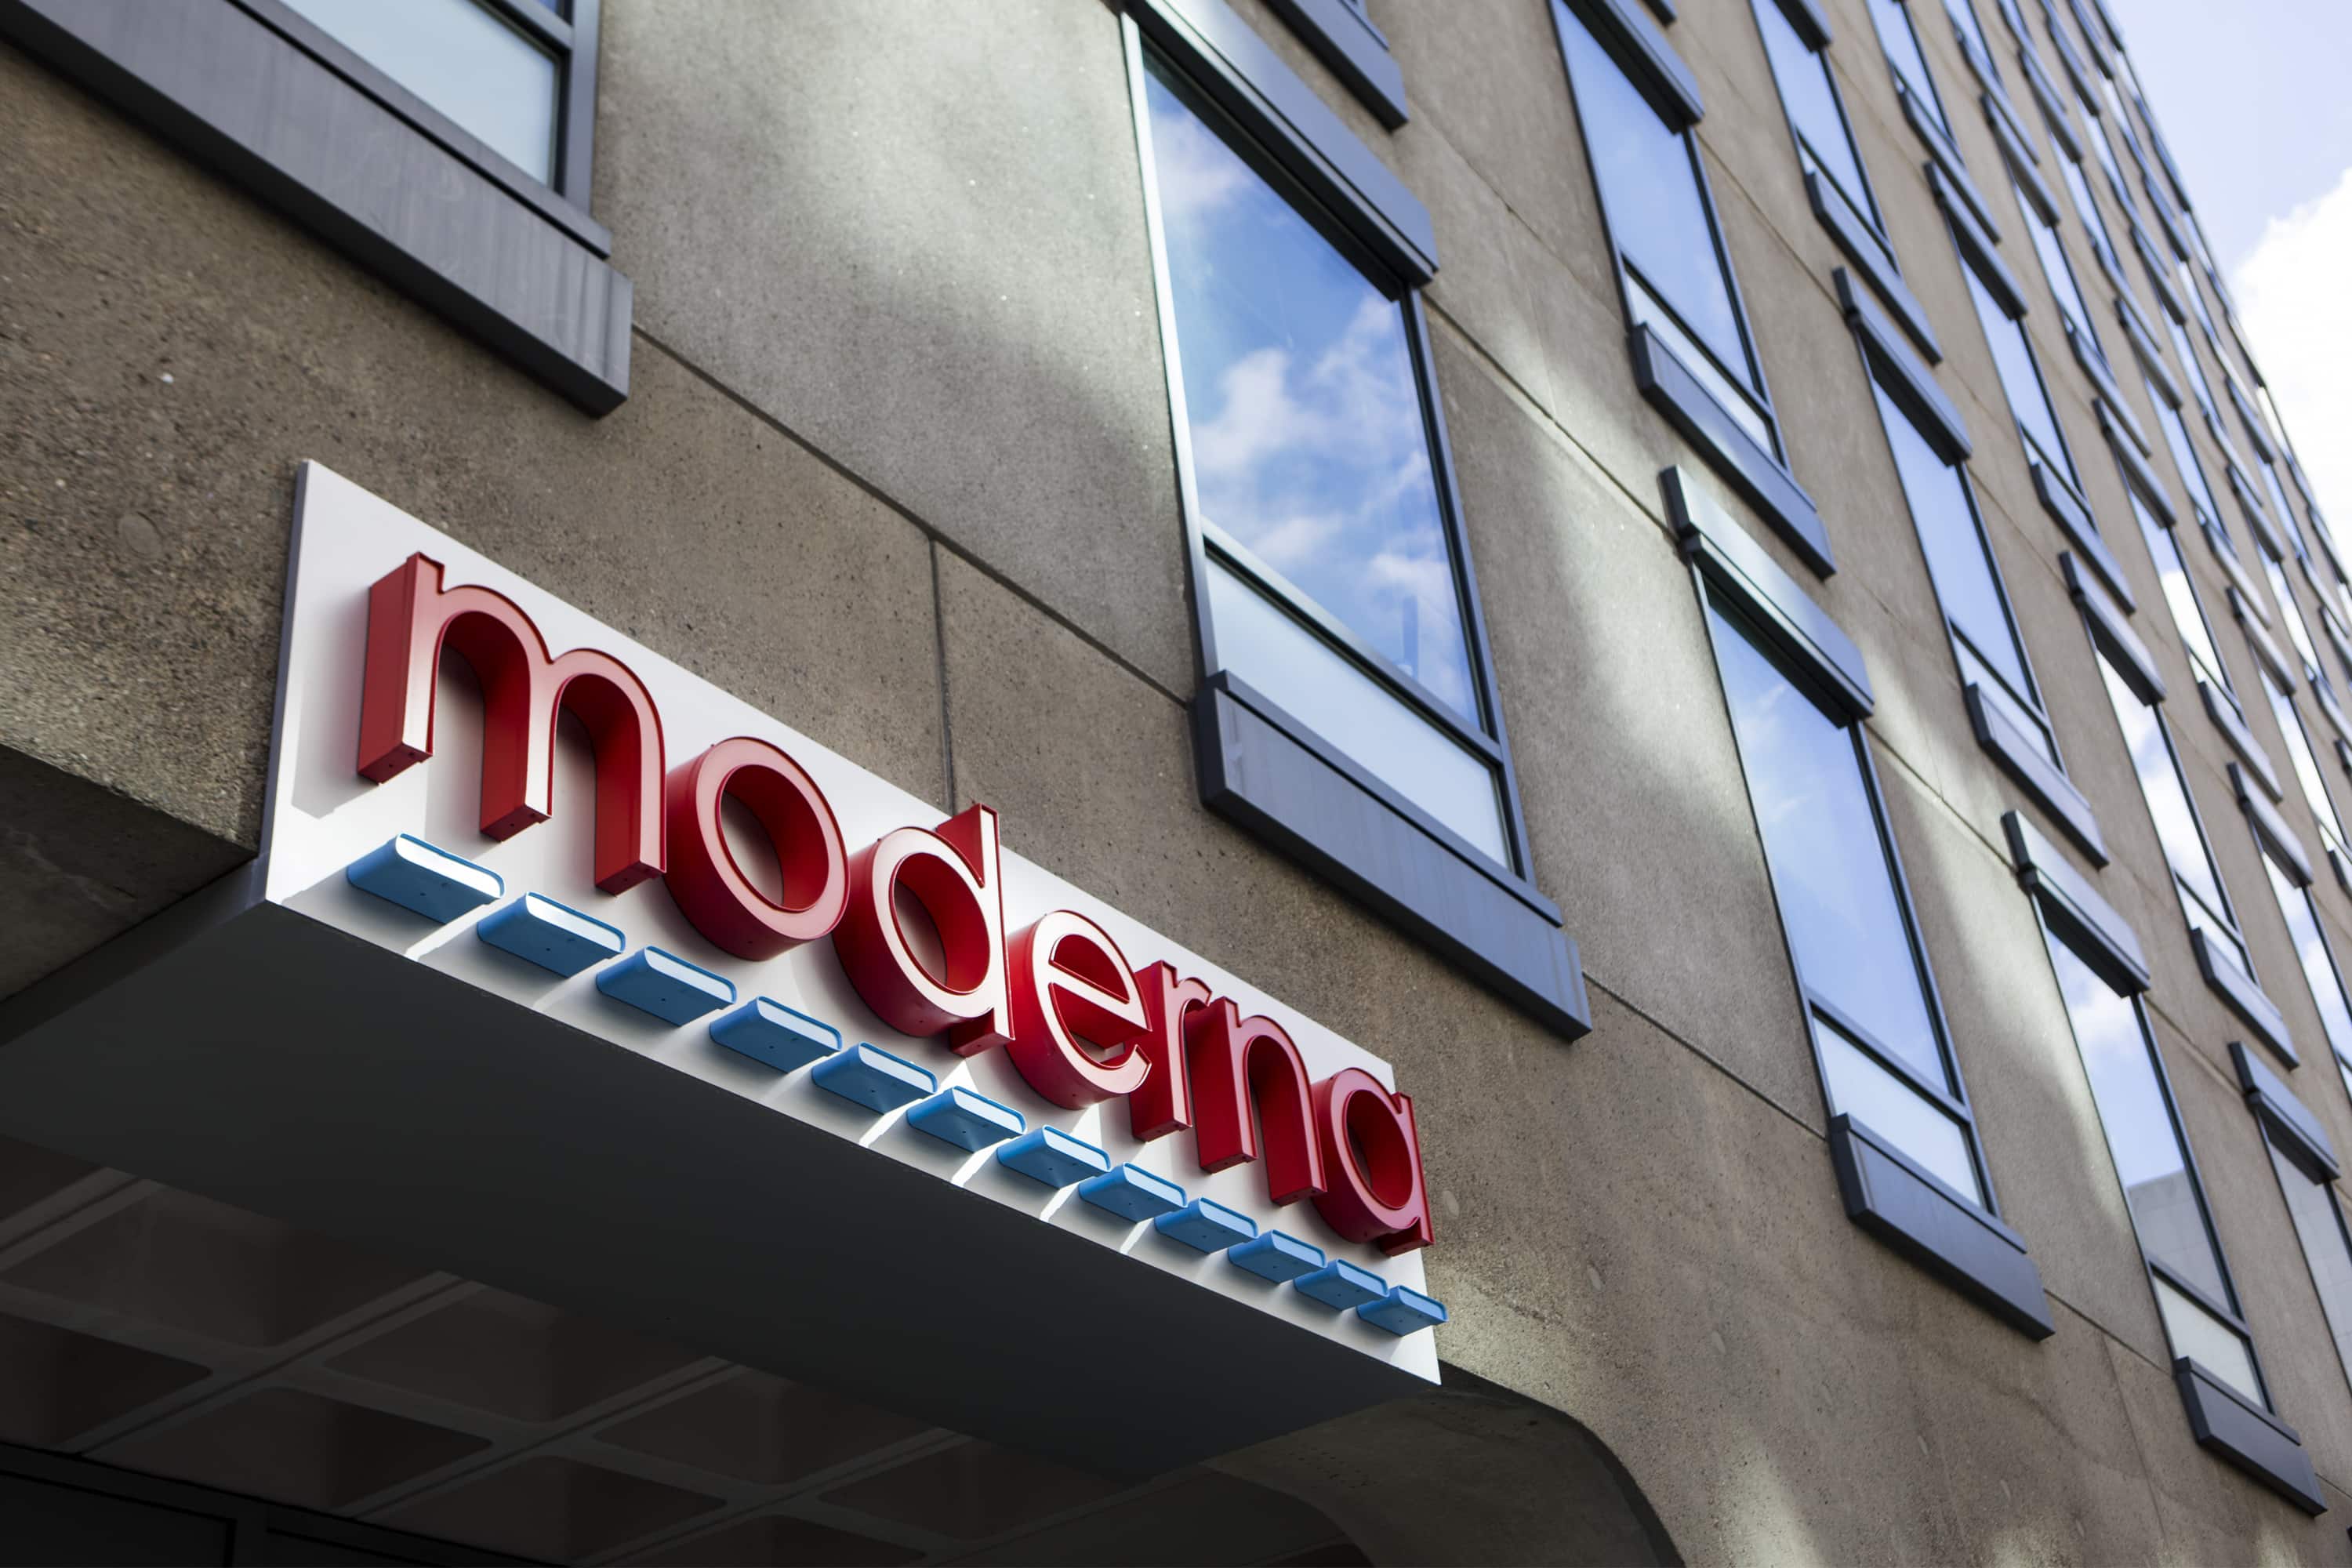 Moderna claims its COVID-19 vaccine is 94.5% effective